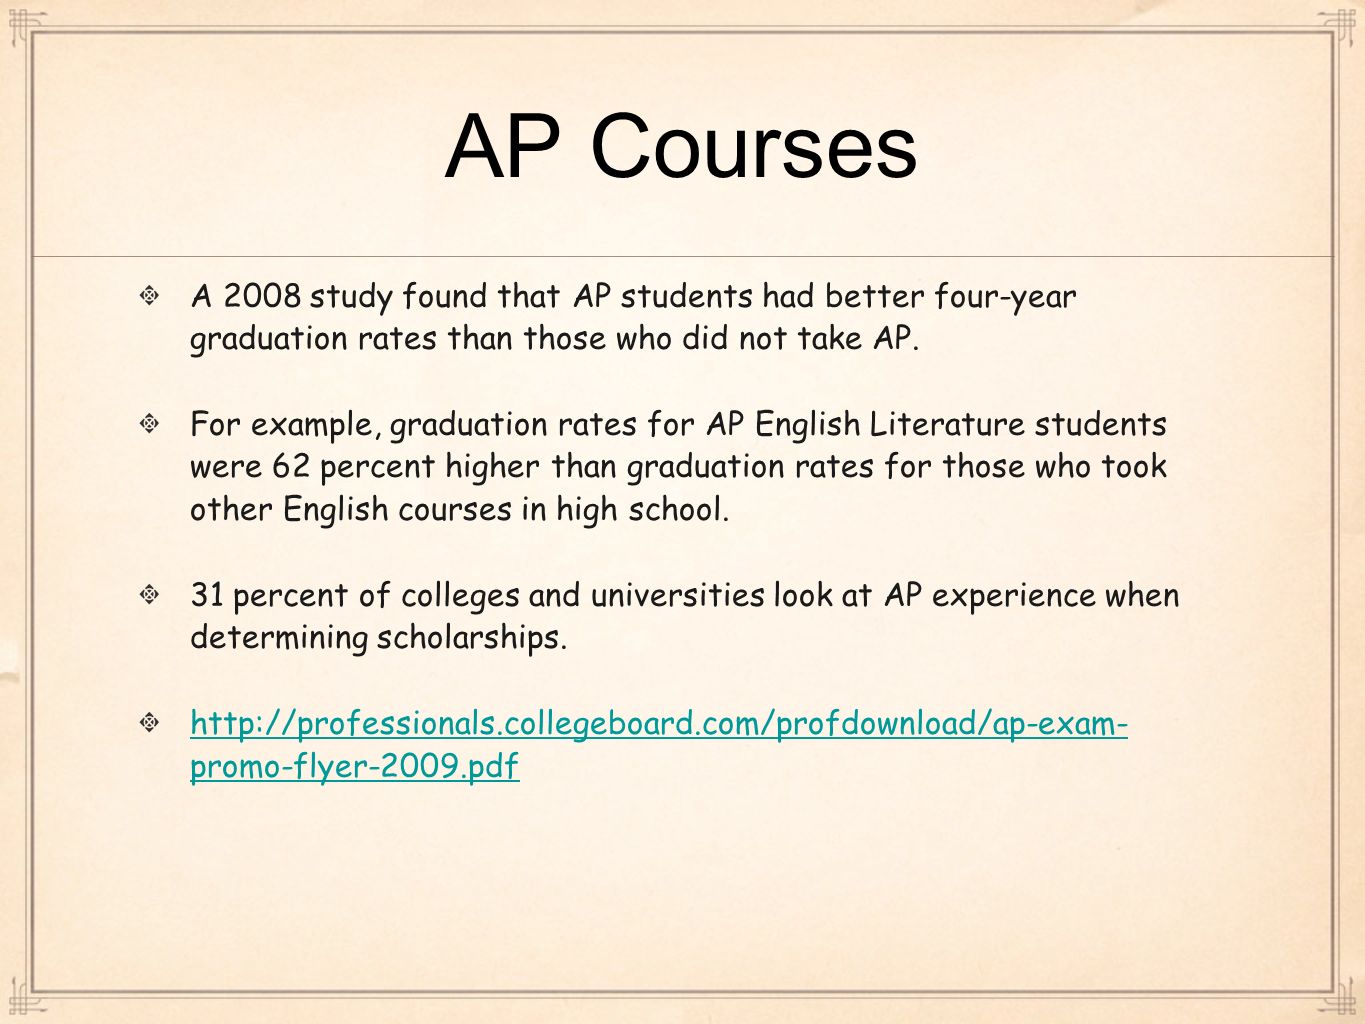 AP Courses A 2008 study found that AP students had better four-year graduation rates than those who did not take AP.